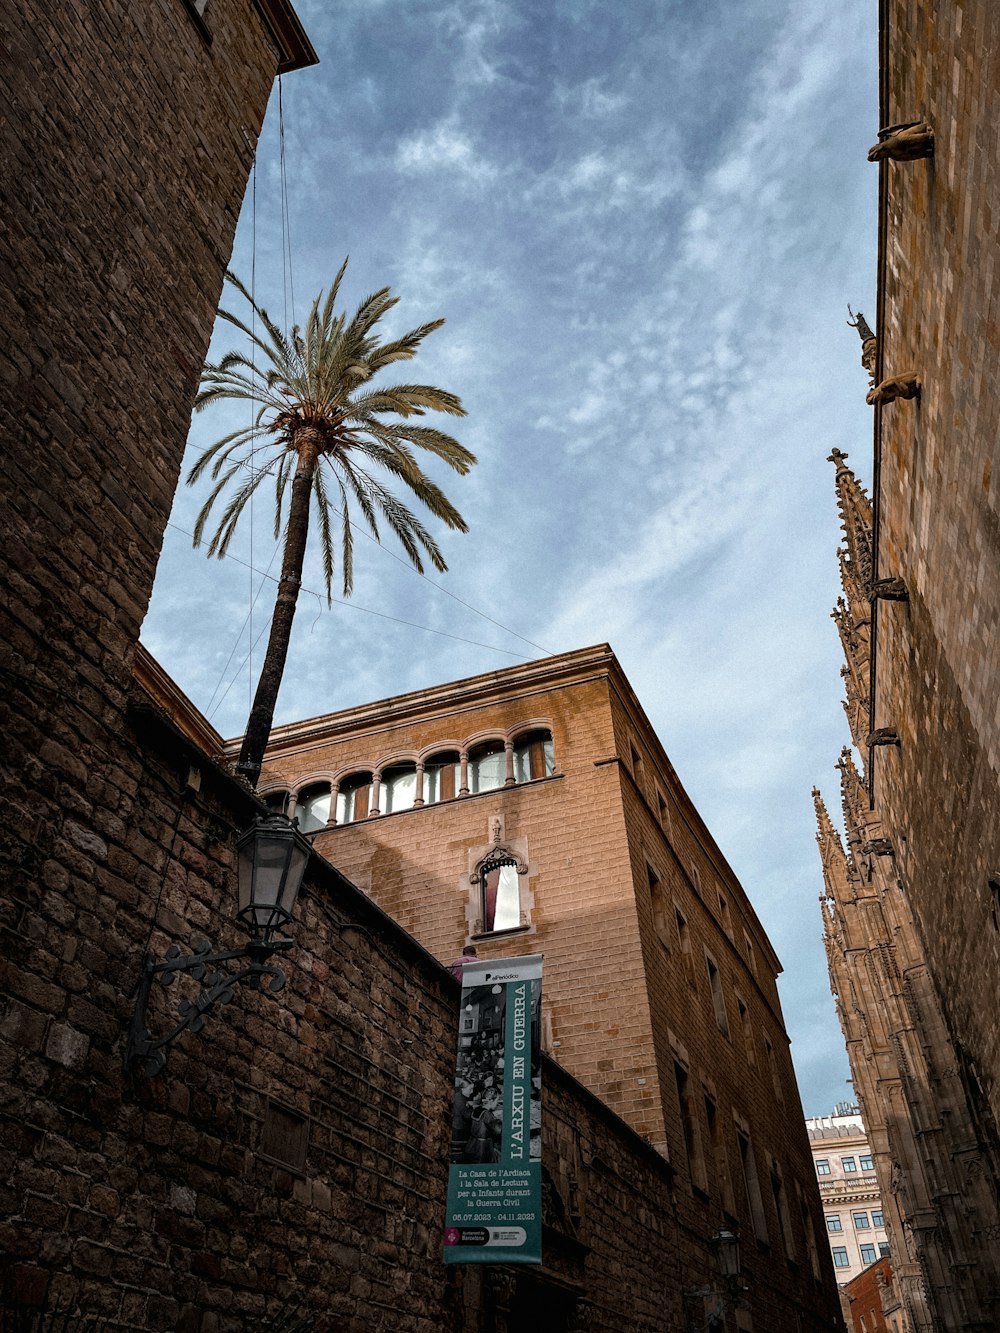 a tall brick building with a palm tree in the foreground